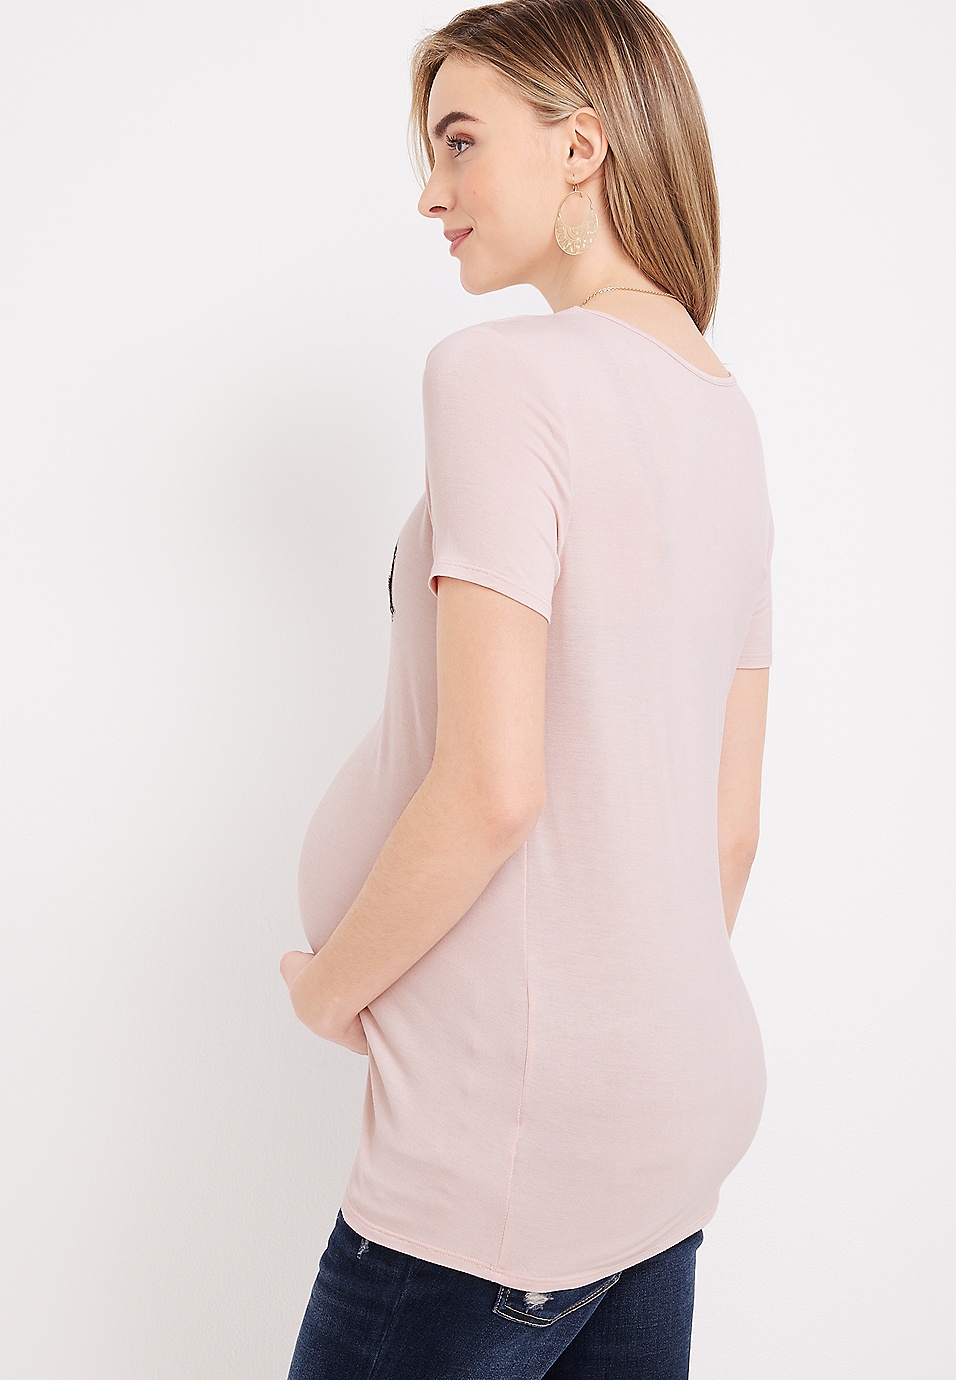 Maternity Graphic Tees in Maternity Tops & T-Shirts 